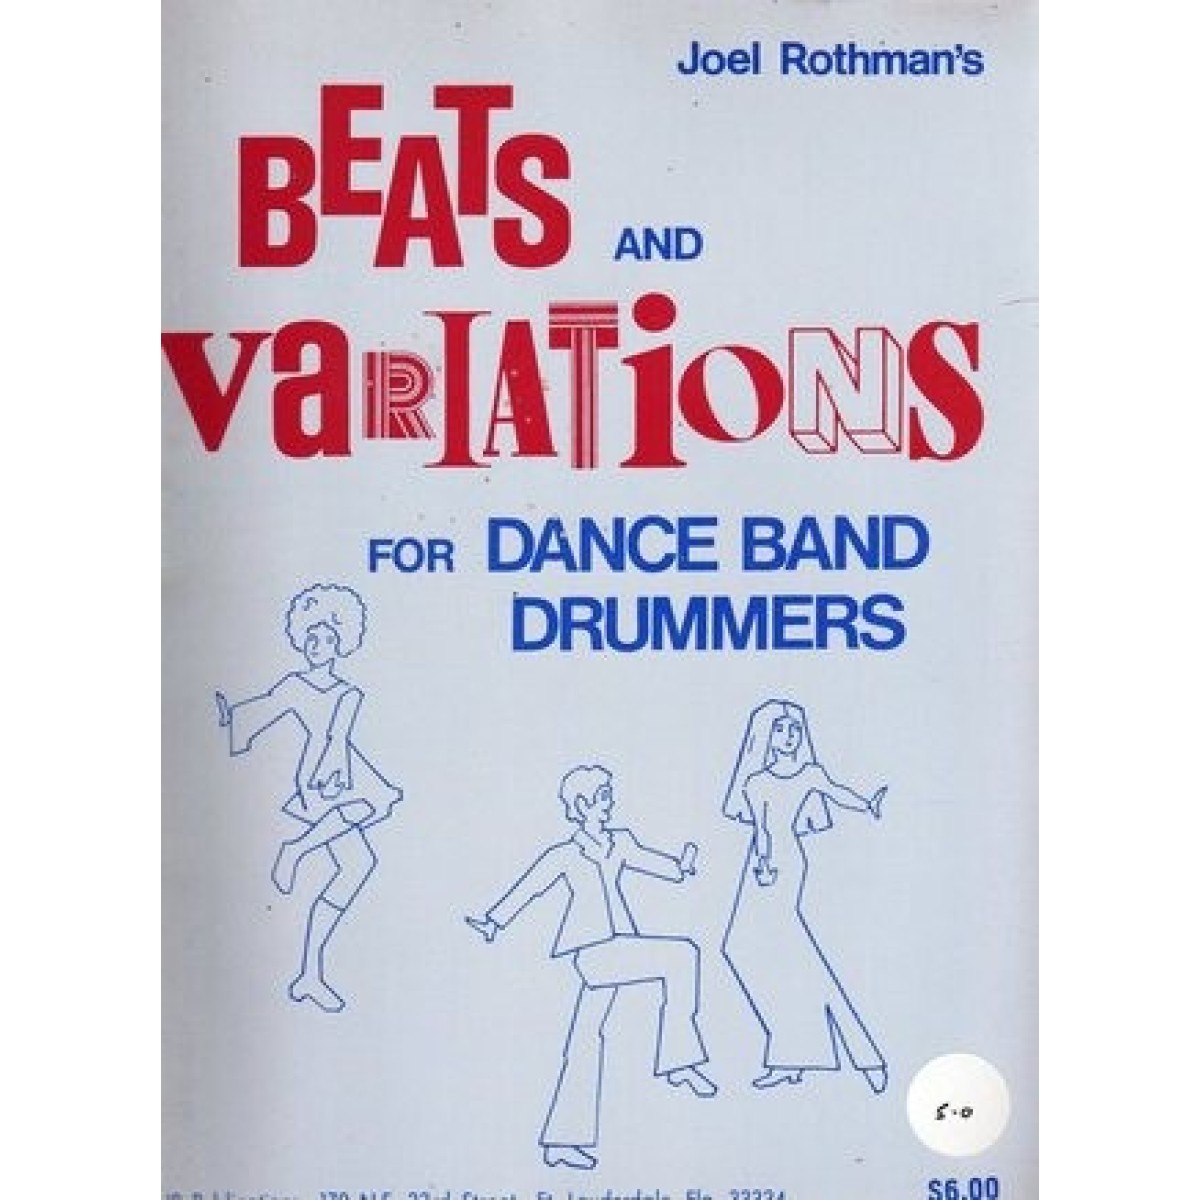 Beats And Variations For Dance Band Drummers